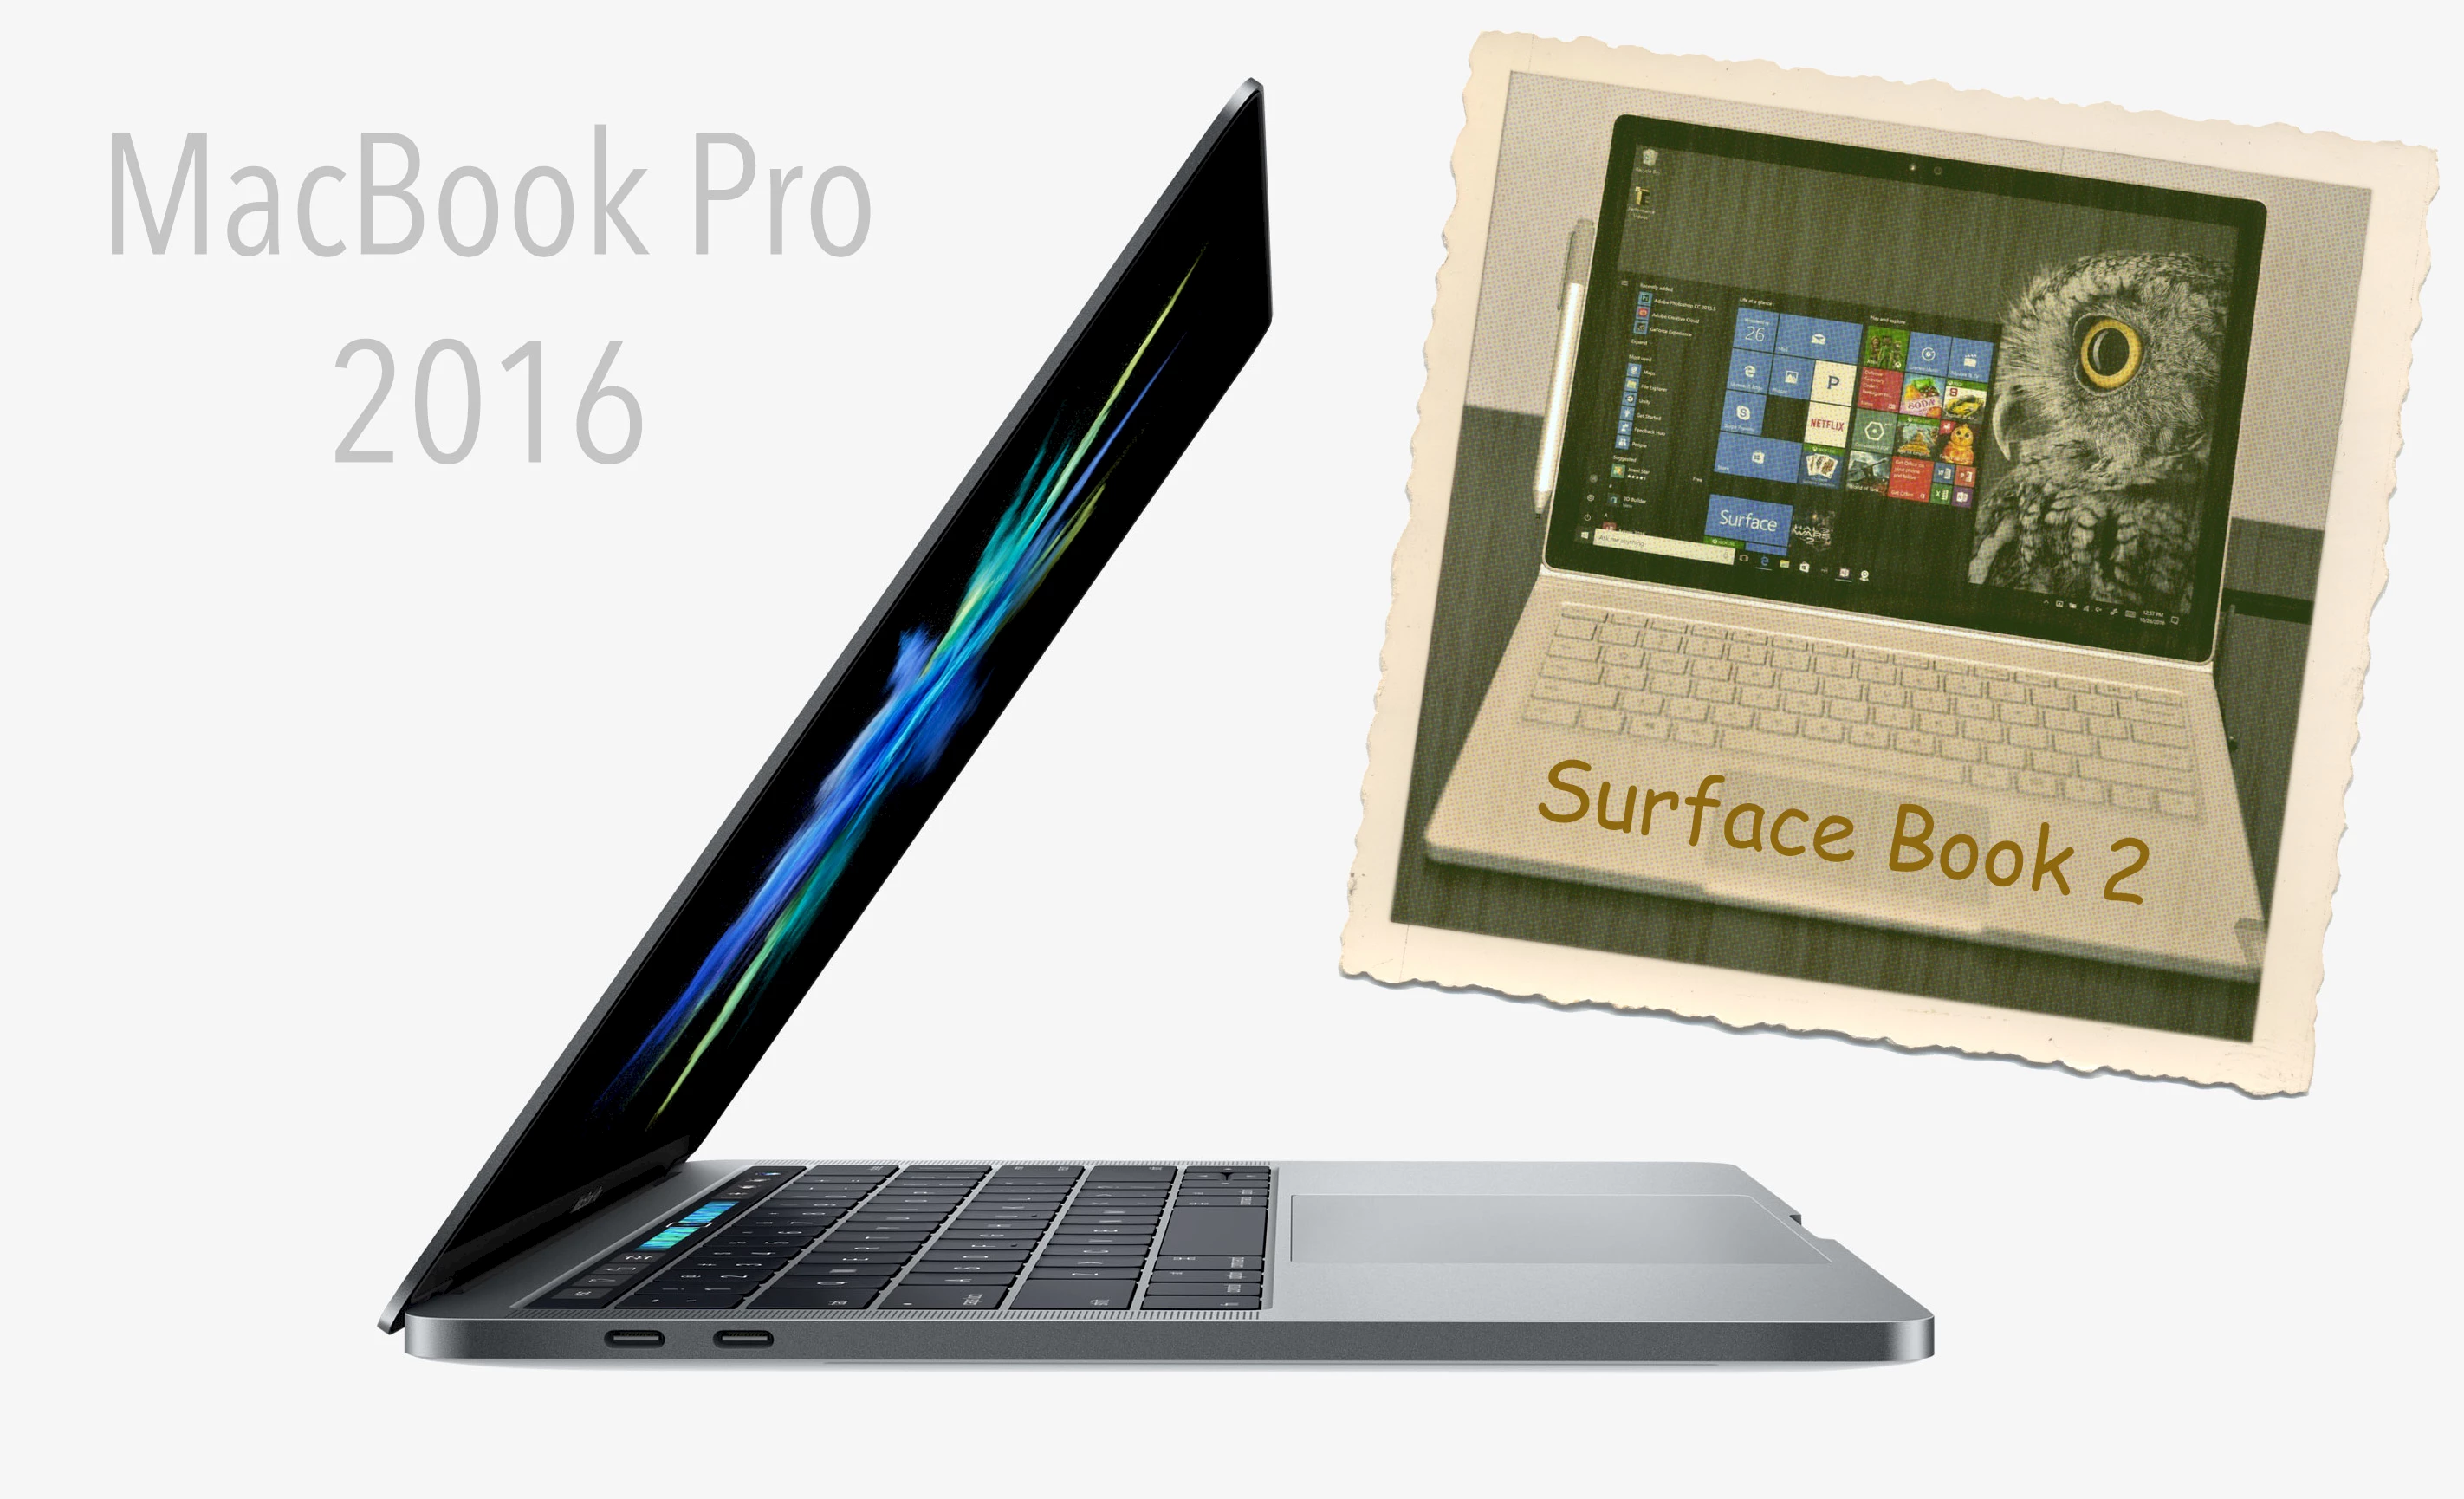 MacBook Pro and Surface Book 2.